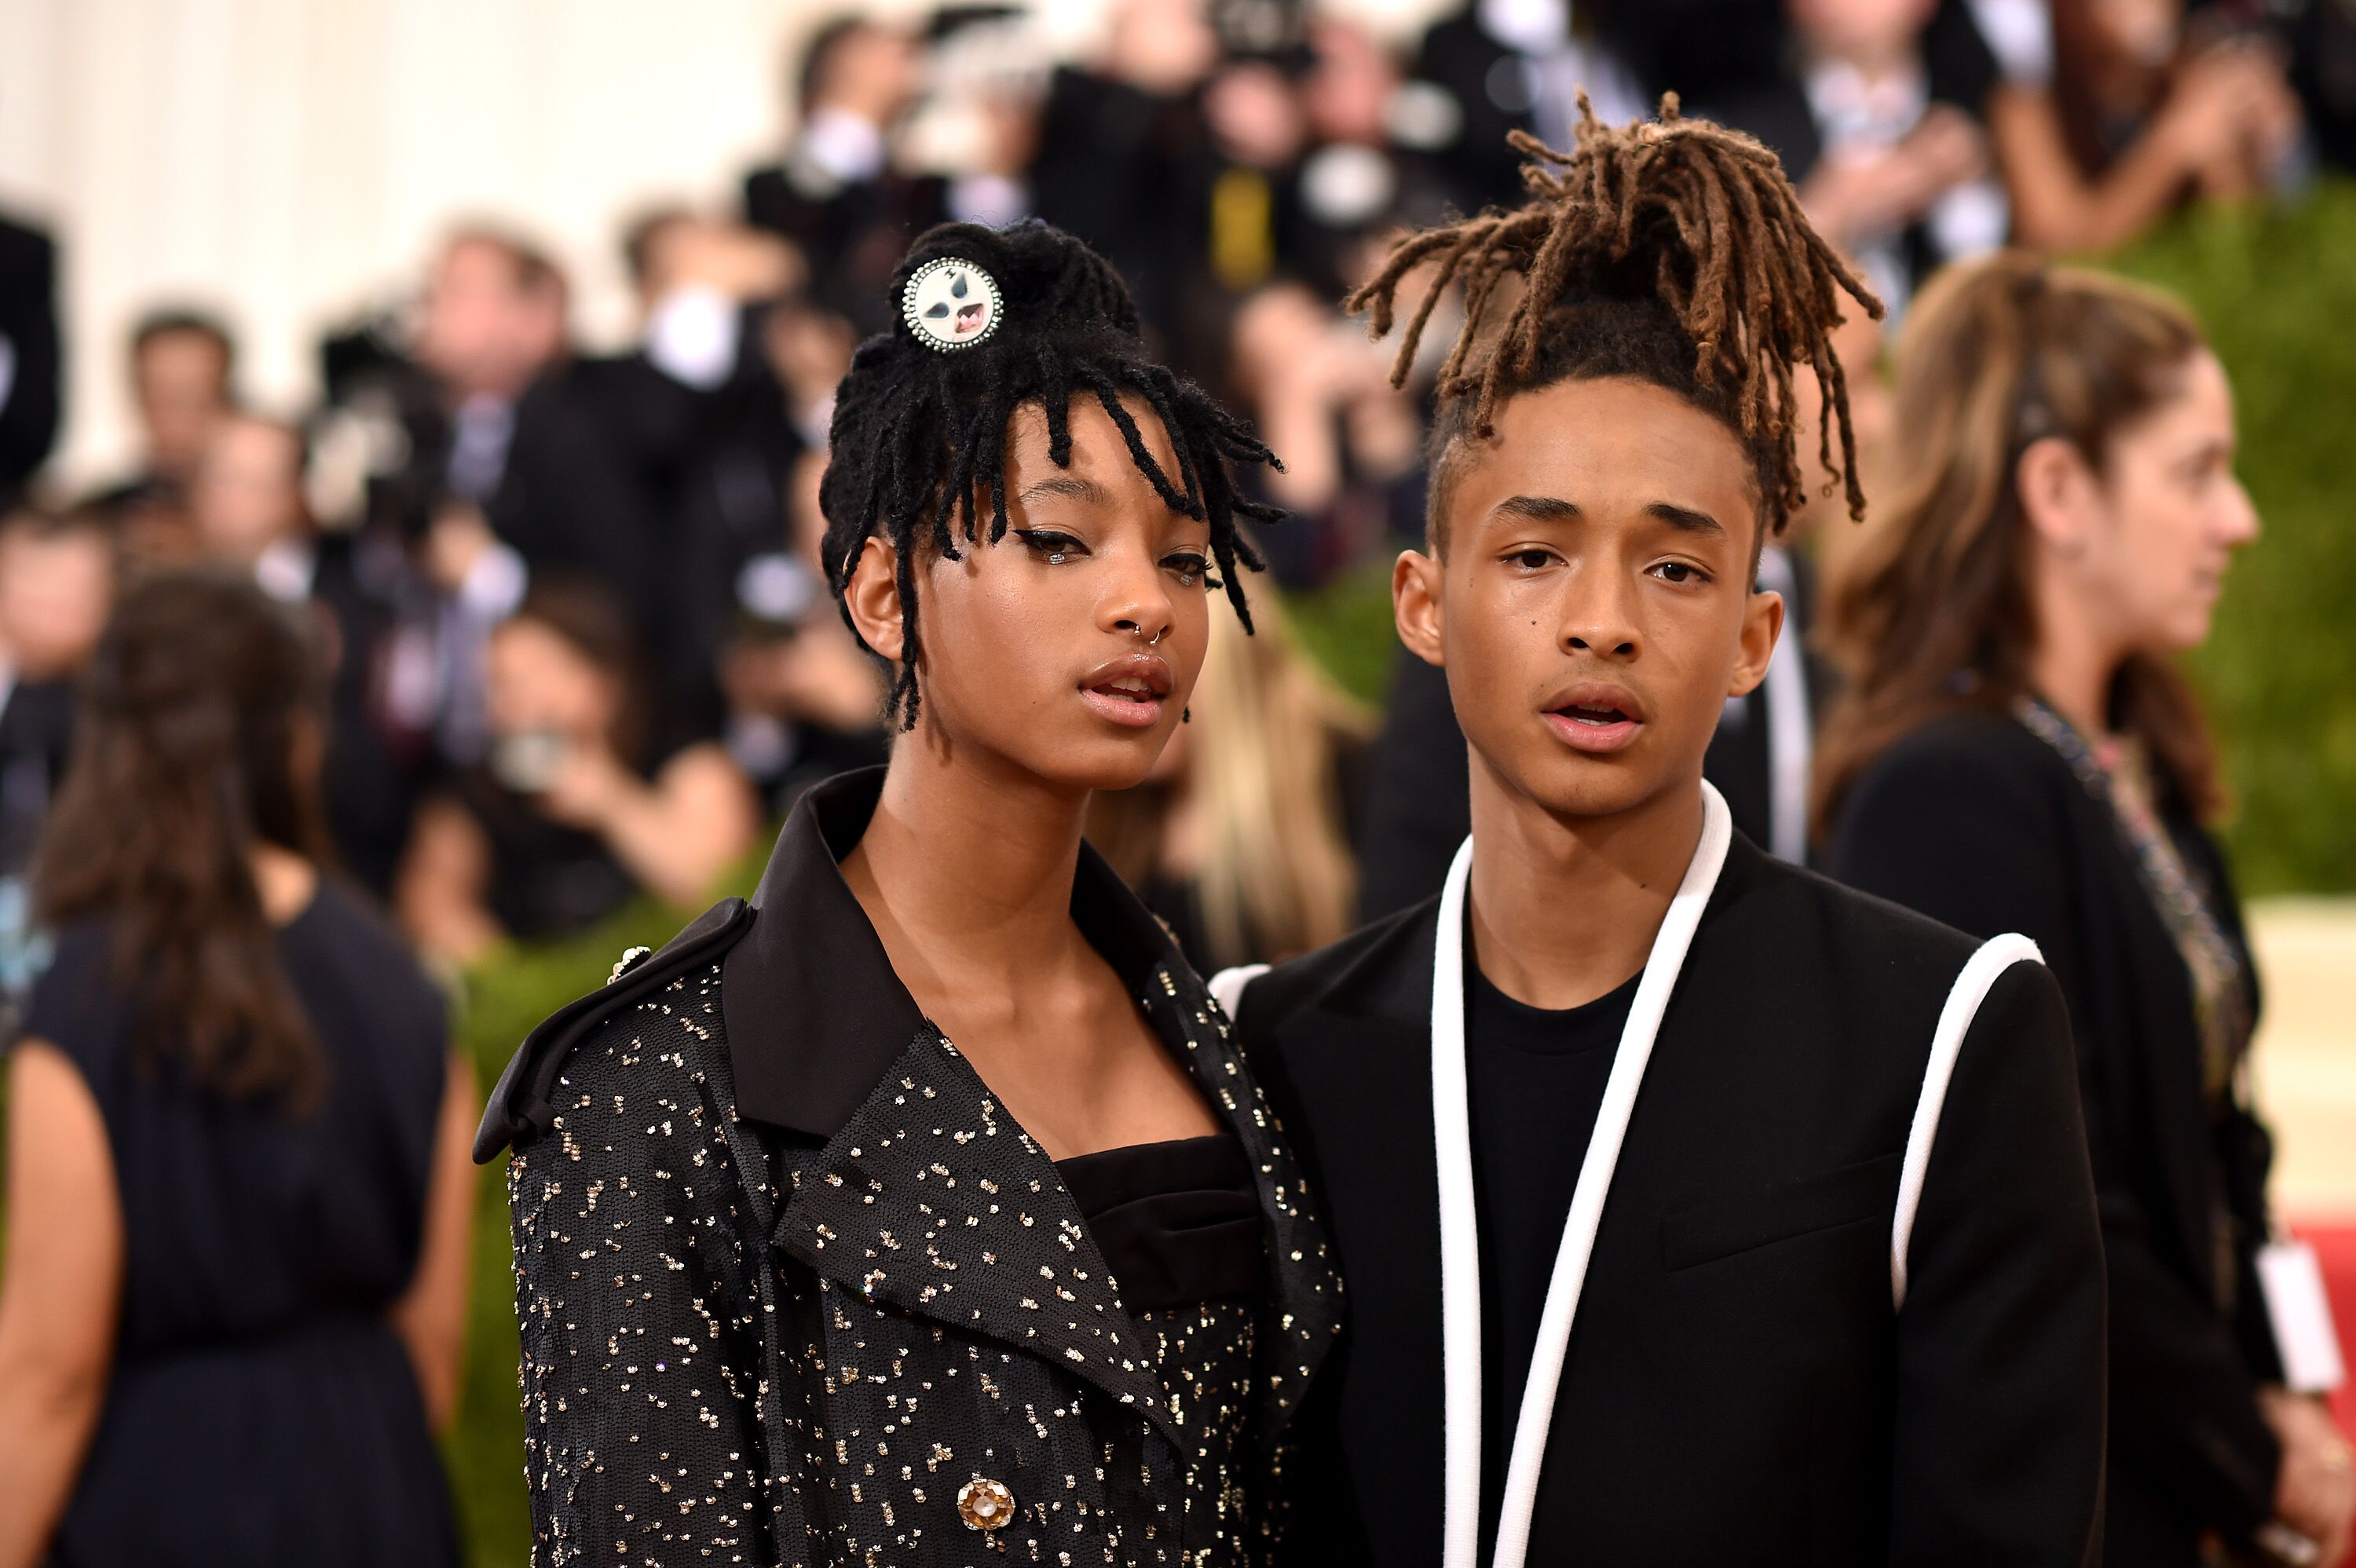 Willow Smith (L) and Jaden Smith attend the "Manus x Machina: Fashion In An Age Of Technology" Costume Institute Gala at Metropolitan Museum of Art on May 2, 2016 | Photo: Getty Images